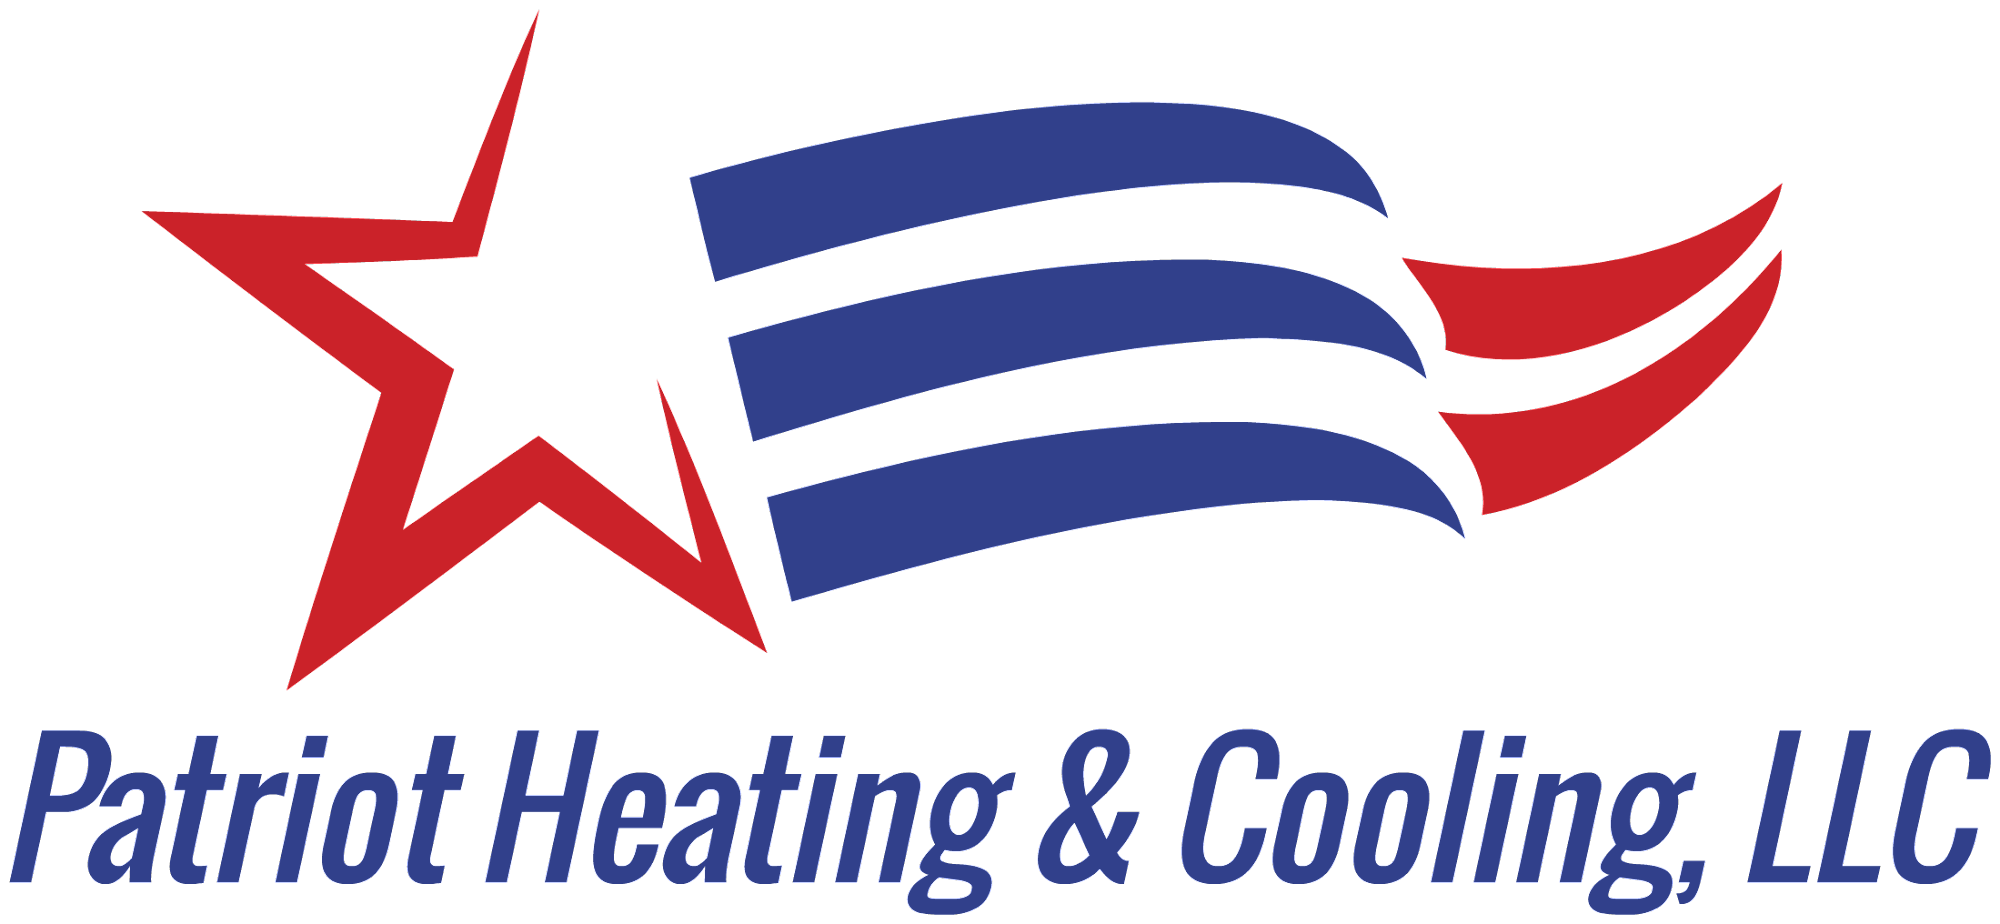 Patriot Heating and Cooling 6257 E Hickory Ridge Ct, Monticello Indiana 47960